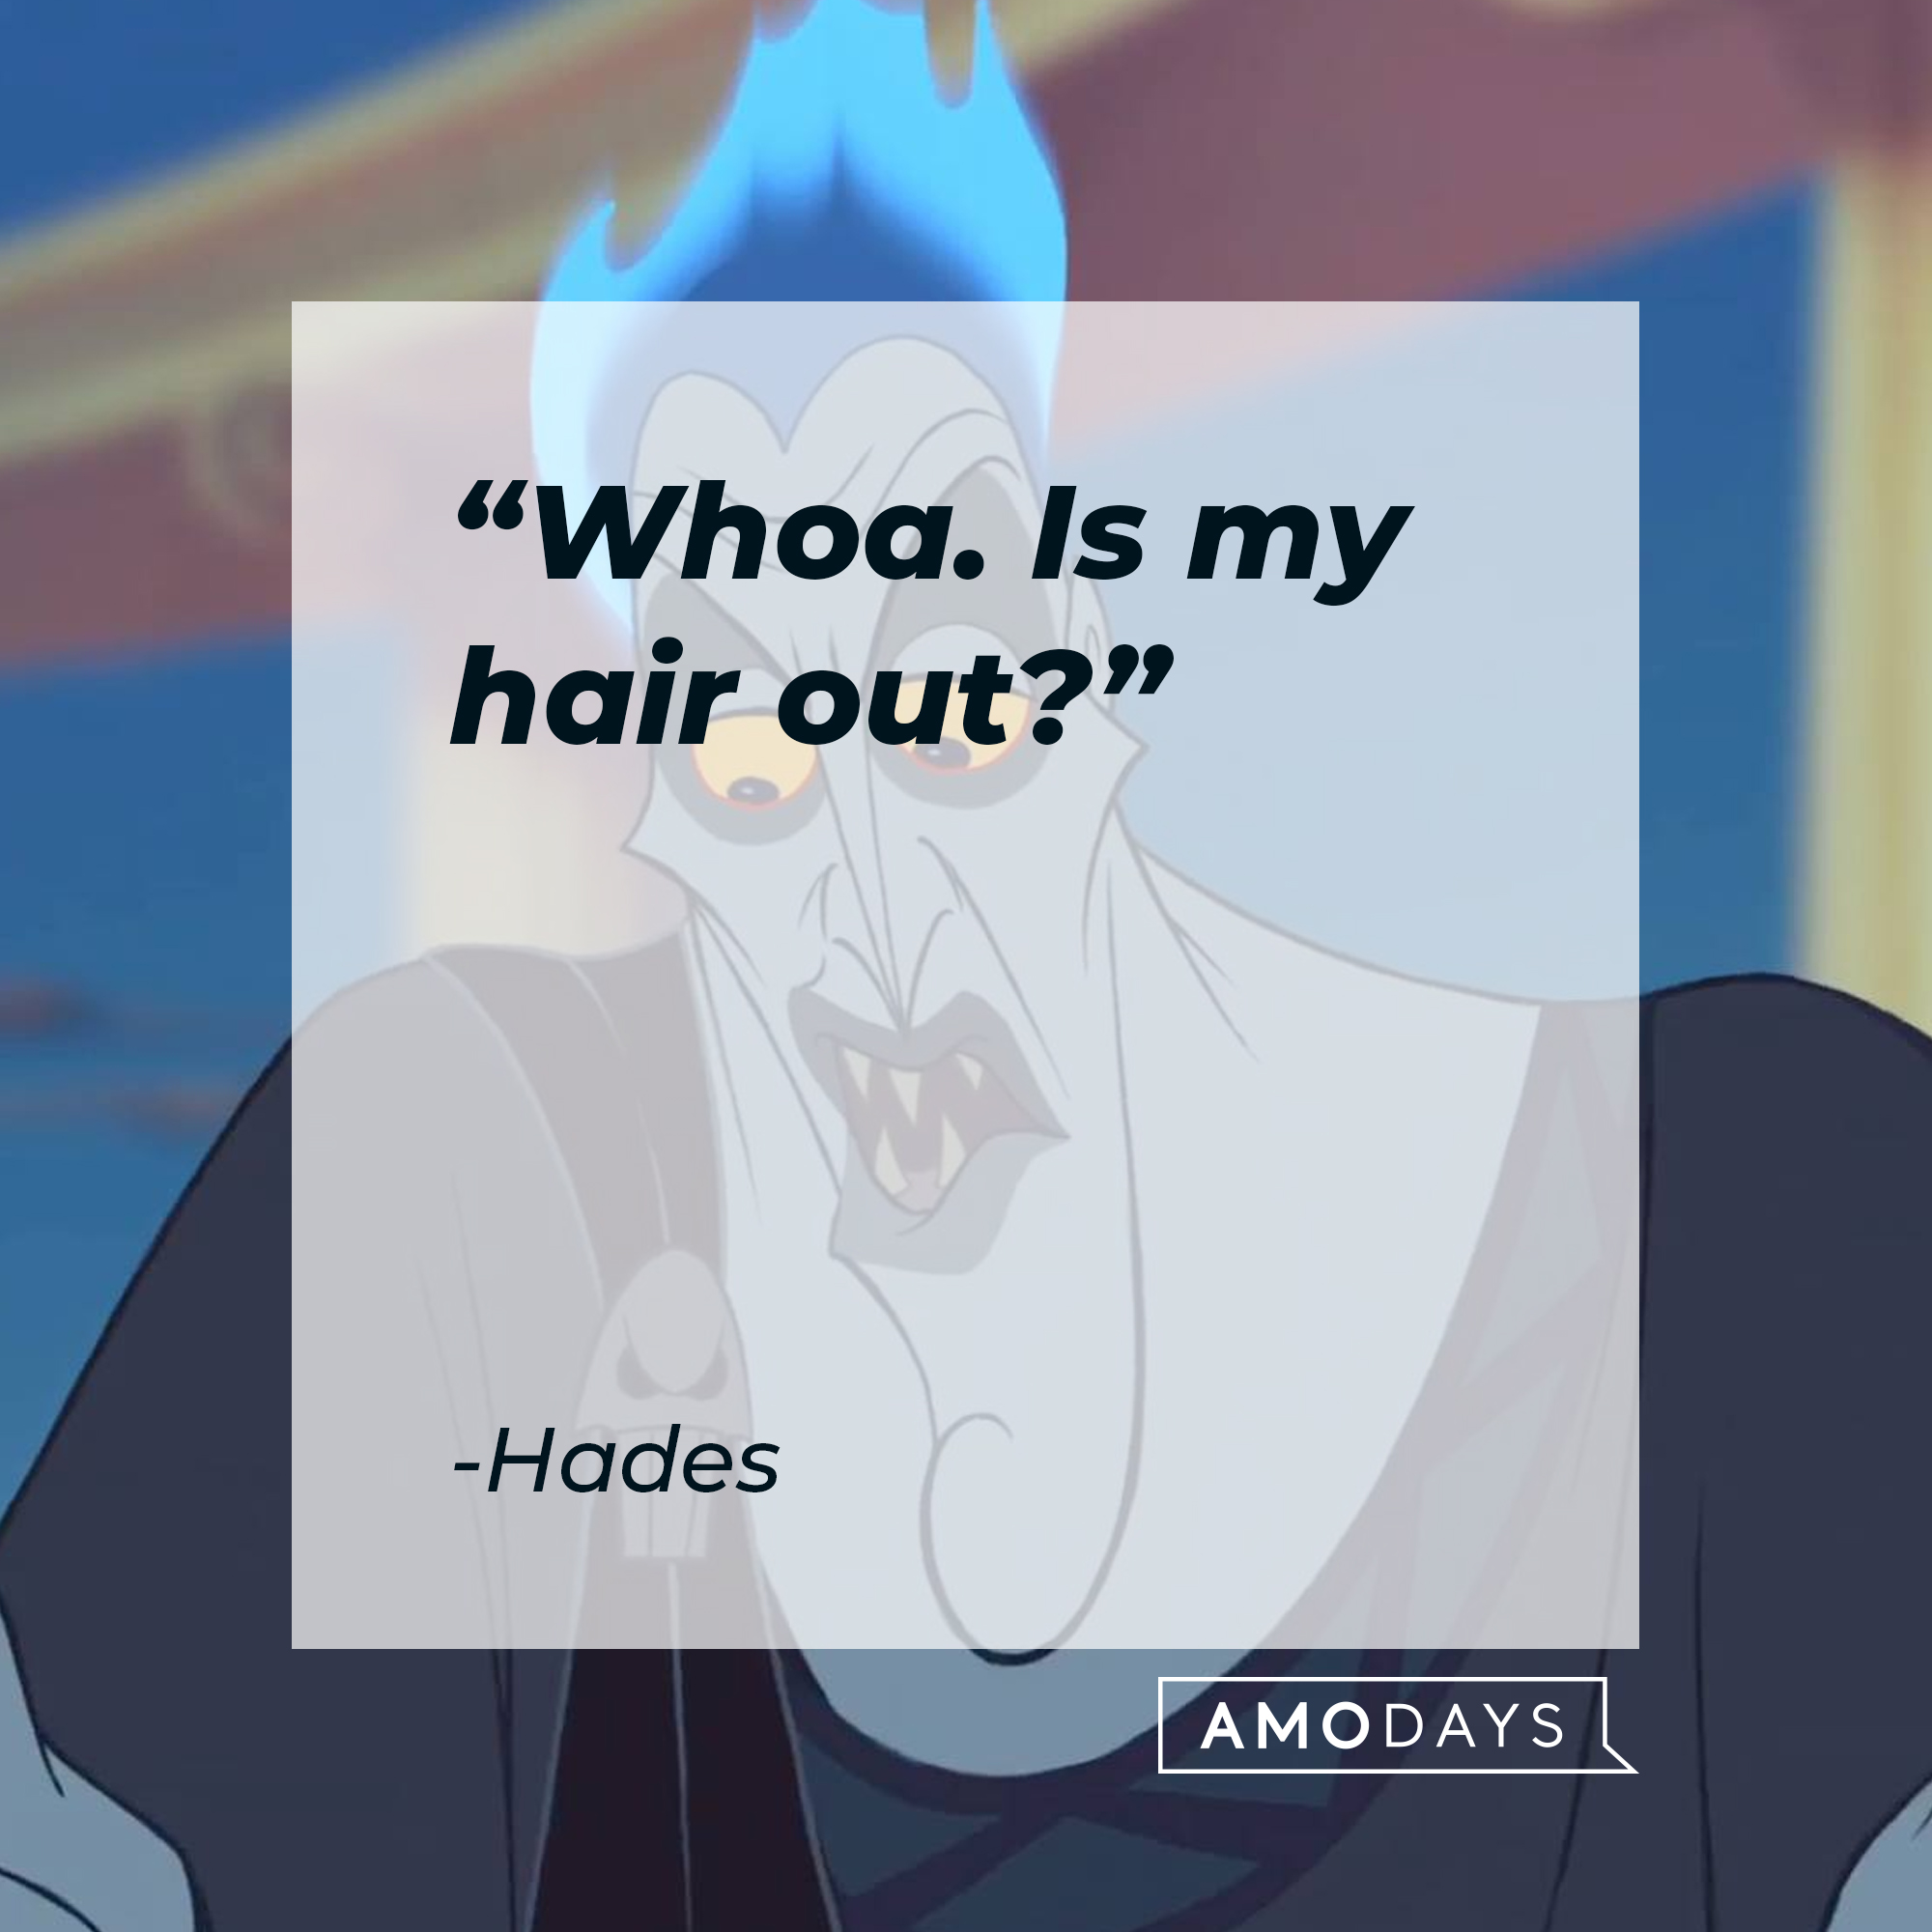 Hades from the "Hercules" movie with his quote: “Whoa. Is my hair out?” | Source: Facebook.com/DisneyHercules